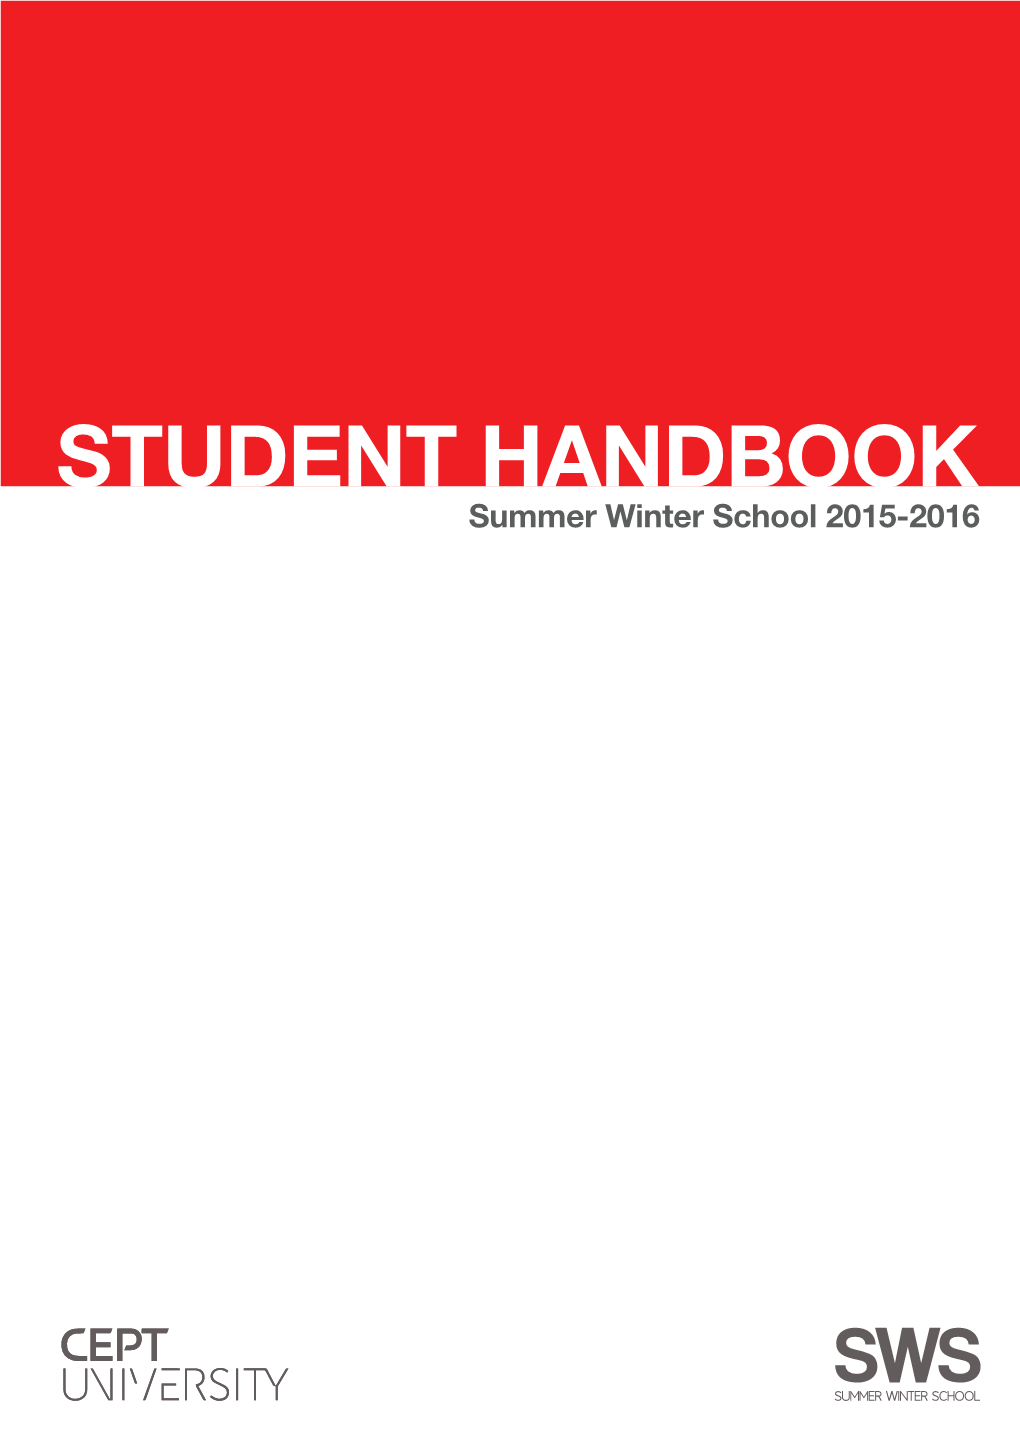 Summer Winter School Rules for the Students